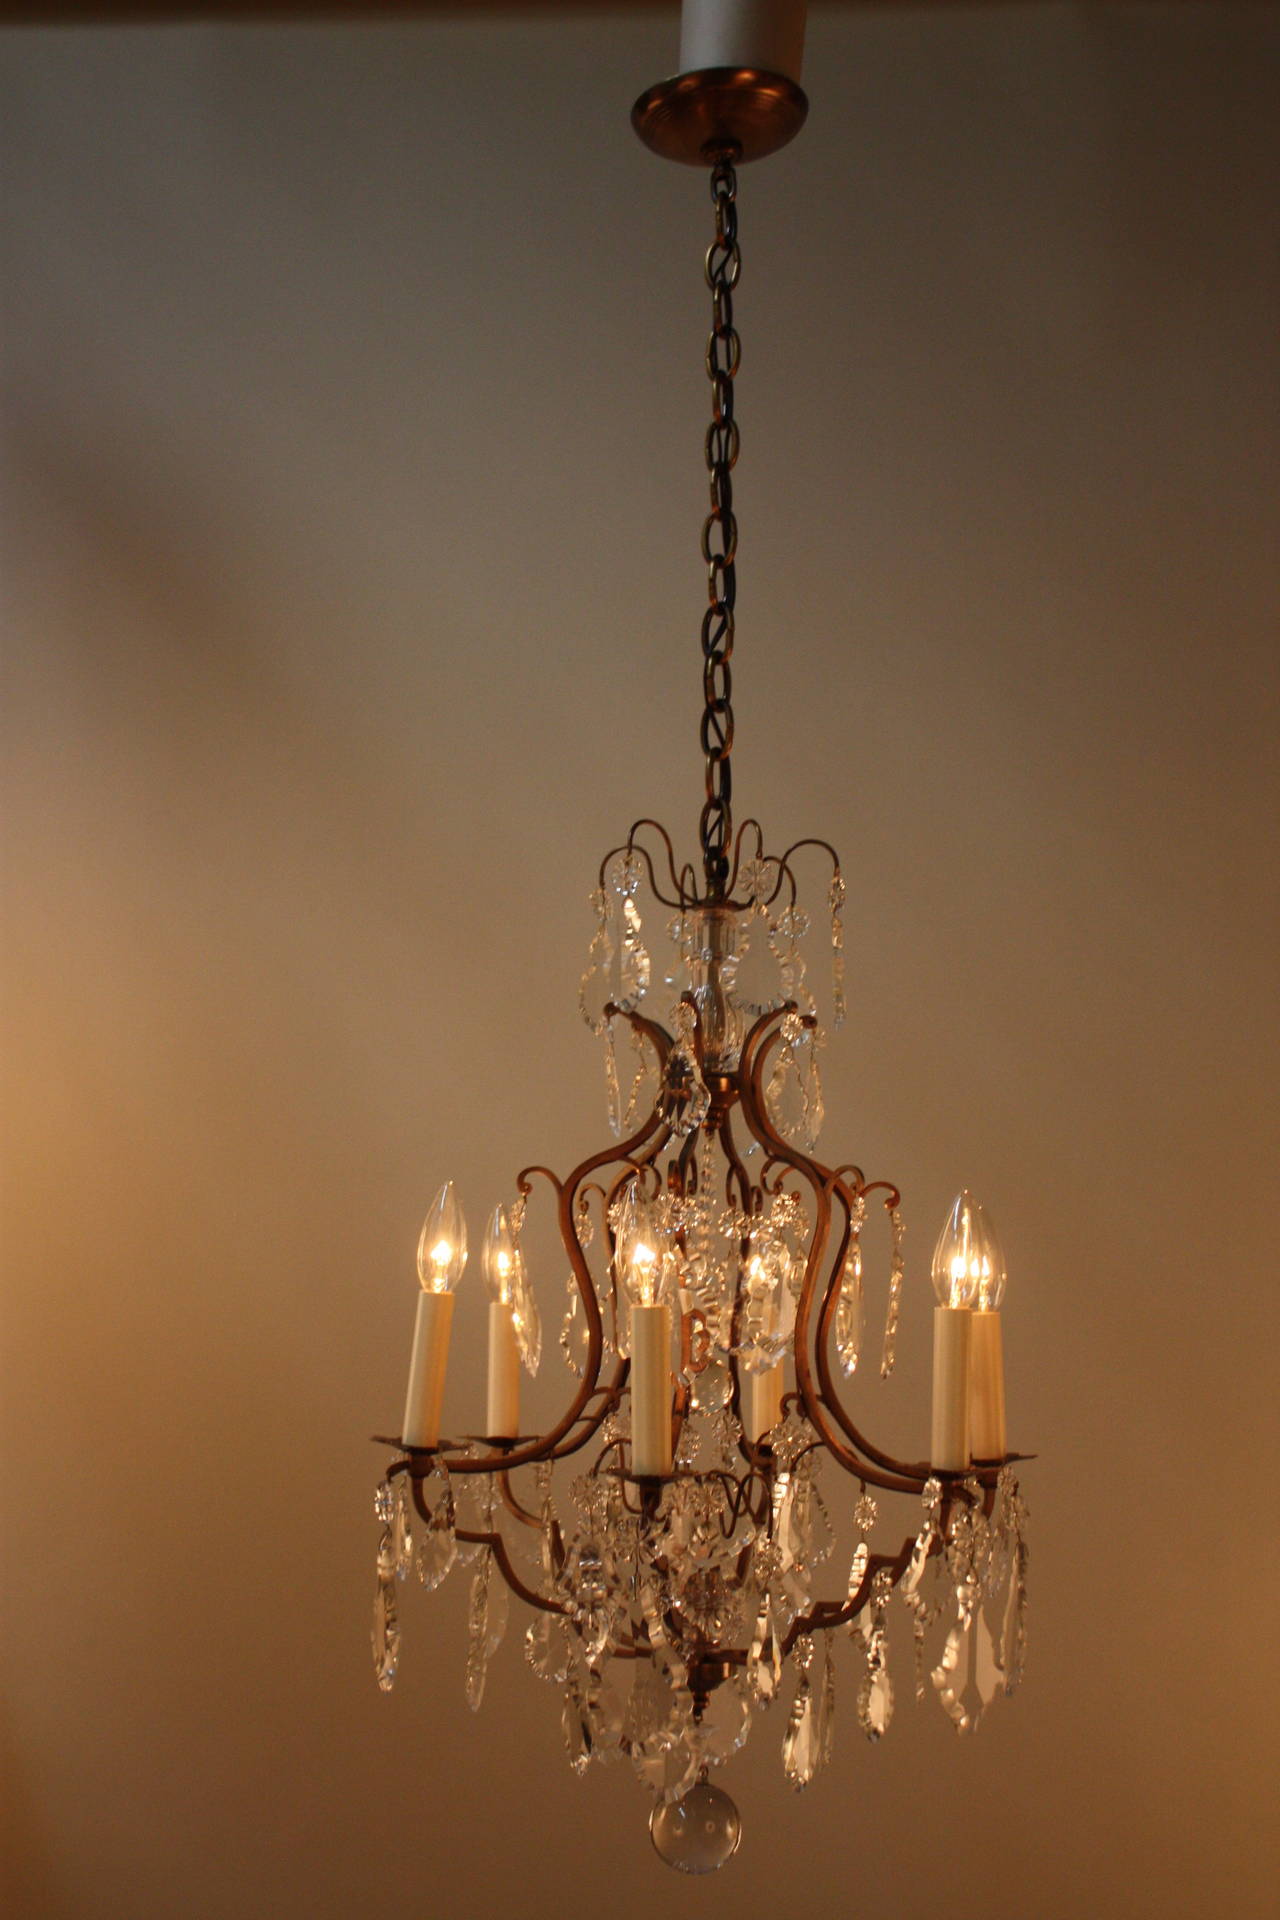 Made in France during the 1920s, this beautiful six-light chandelier features a Classic bronze design and elegant hanging crystals.